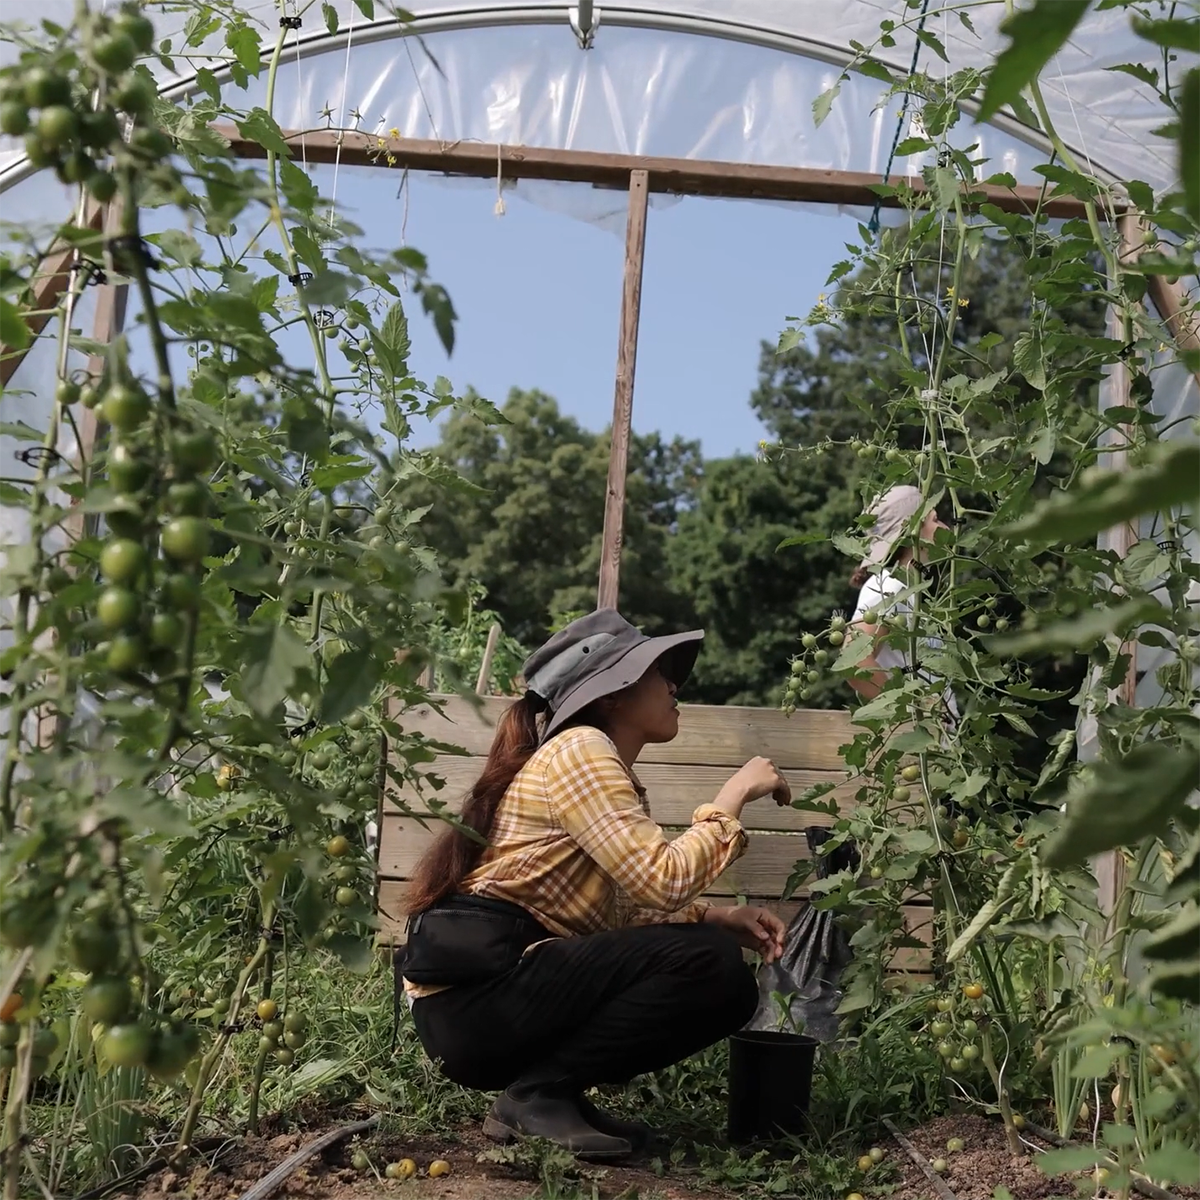 Photo of a young woman in garden gloves and a hat reaching out towards a tomato plant in a greenhouse